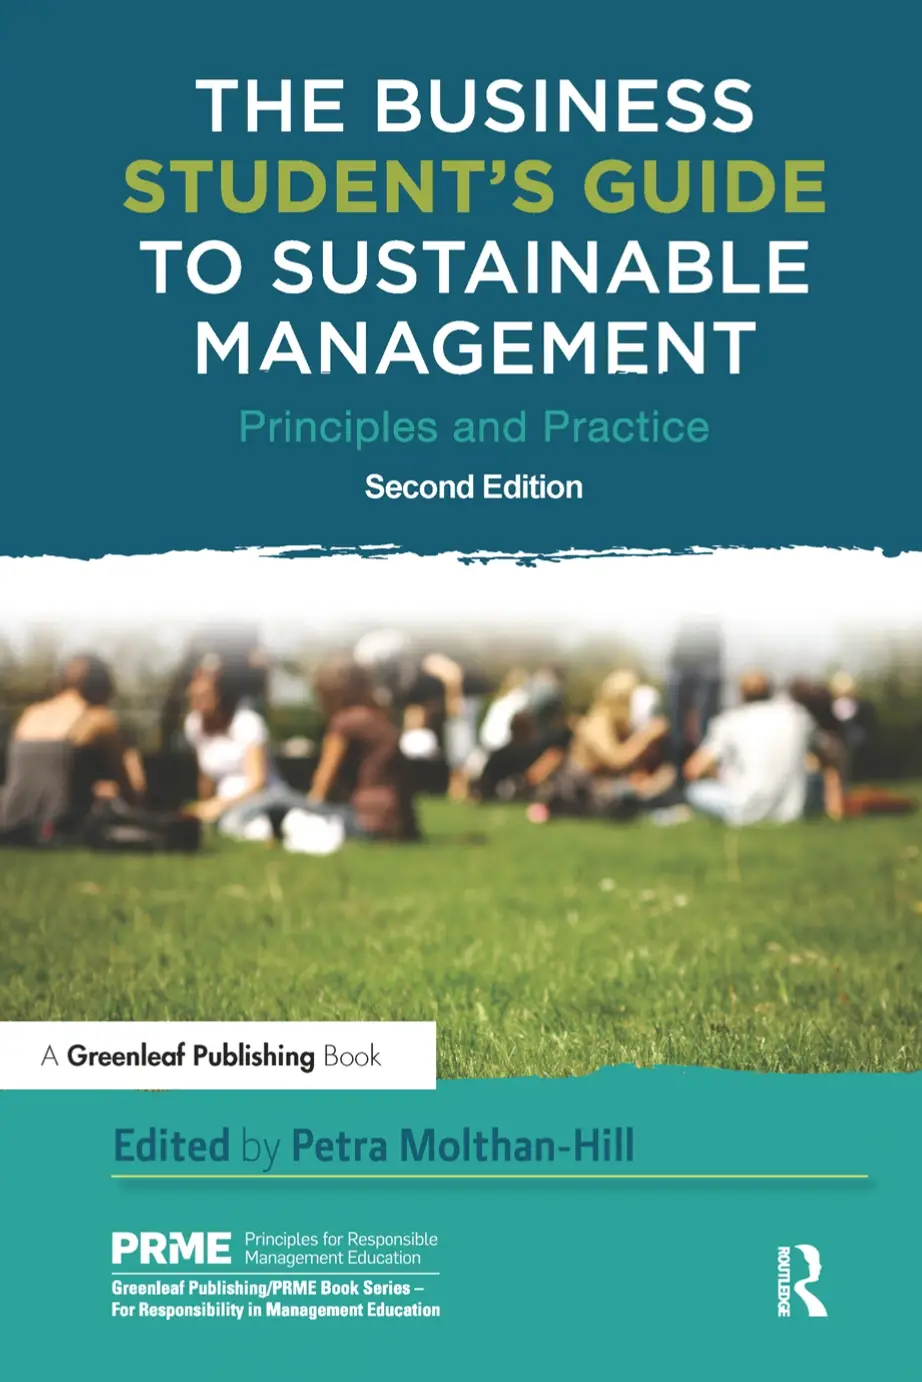 The Business Student's Guide To Sustainable Management Principles And Practice